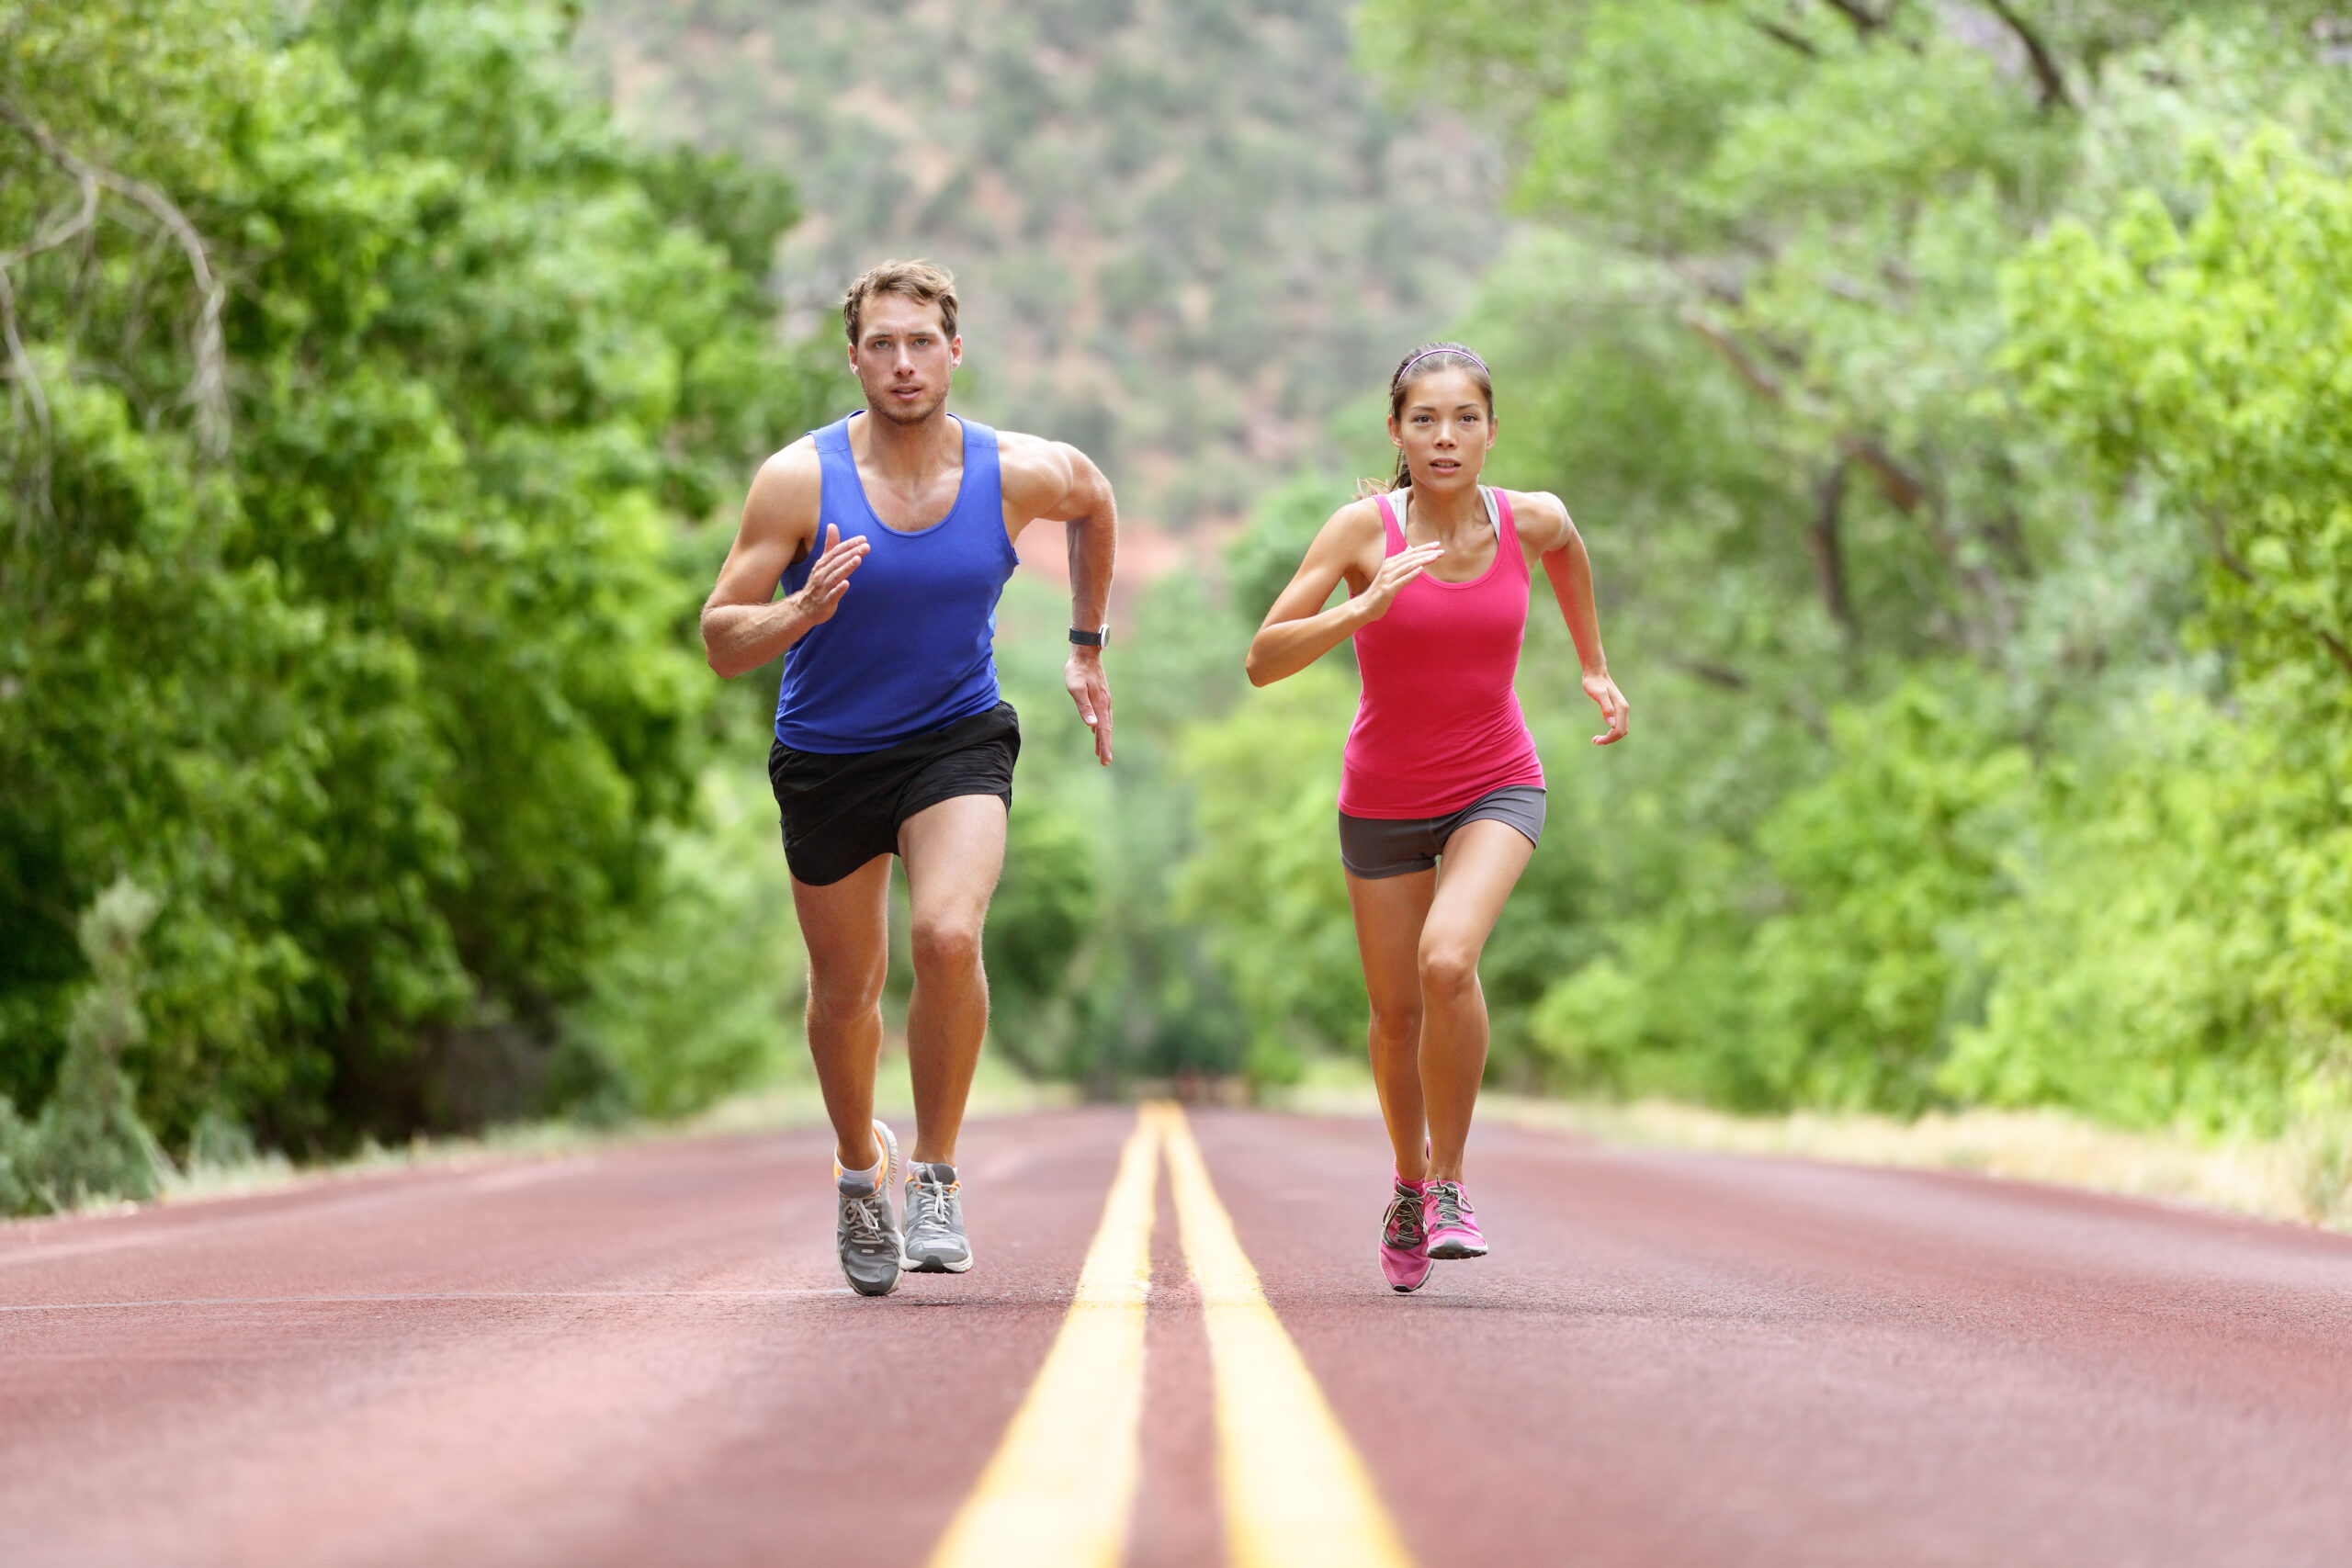 Man and woman running